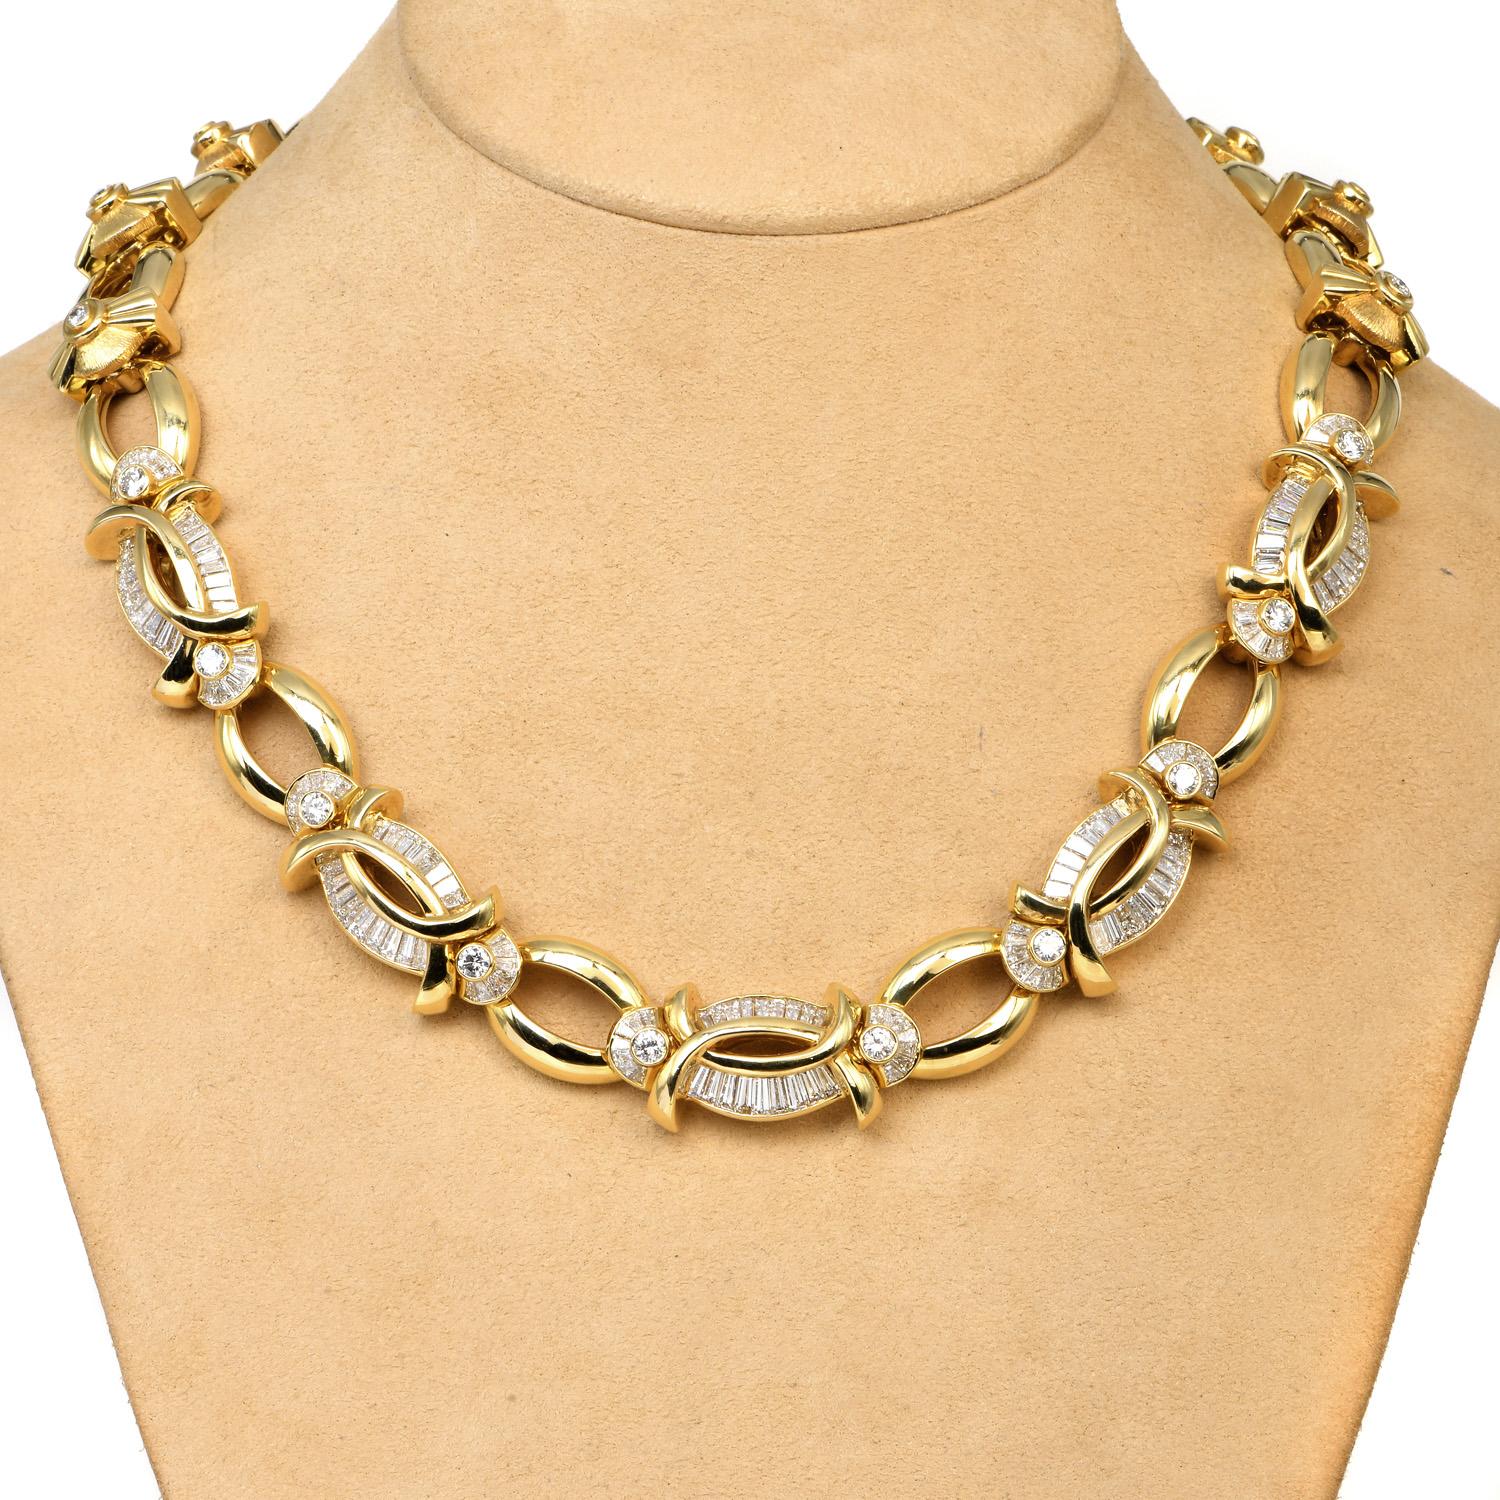 This high polish oversized Kurt Wayne diamond necklace is Crafted in solid hefty 18K yellow gold with a polished finish, with a crossover fancy link design.

links adorned by (21) round-cut, bezel-set, genuine diamonds, and 160 Baguette-cut,